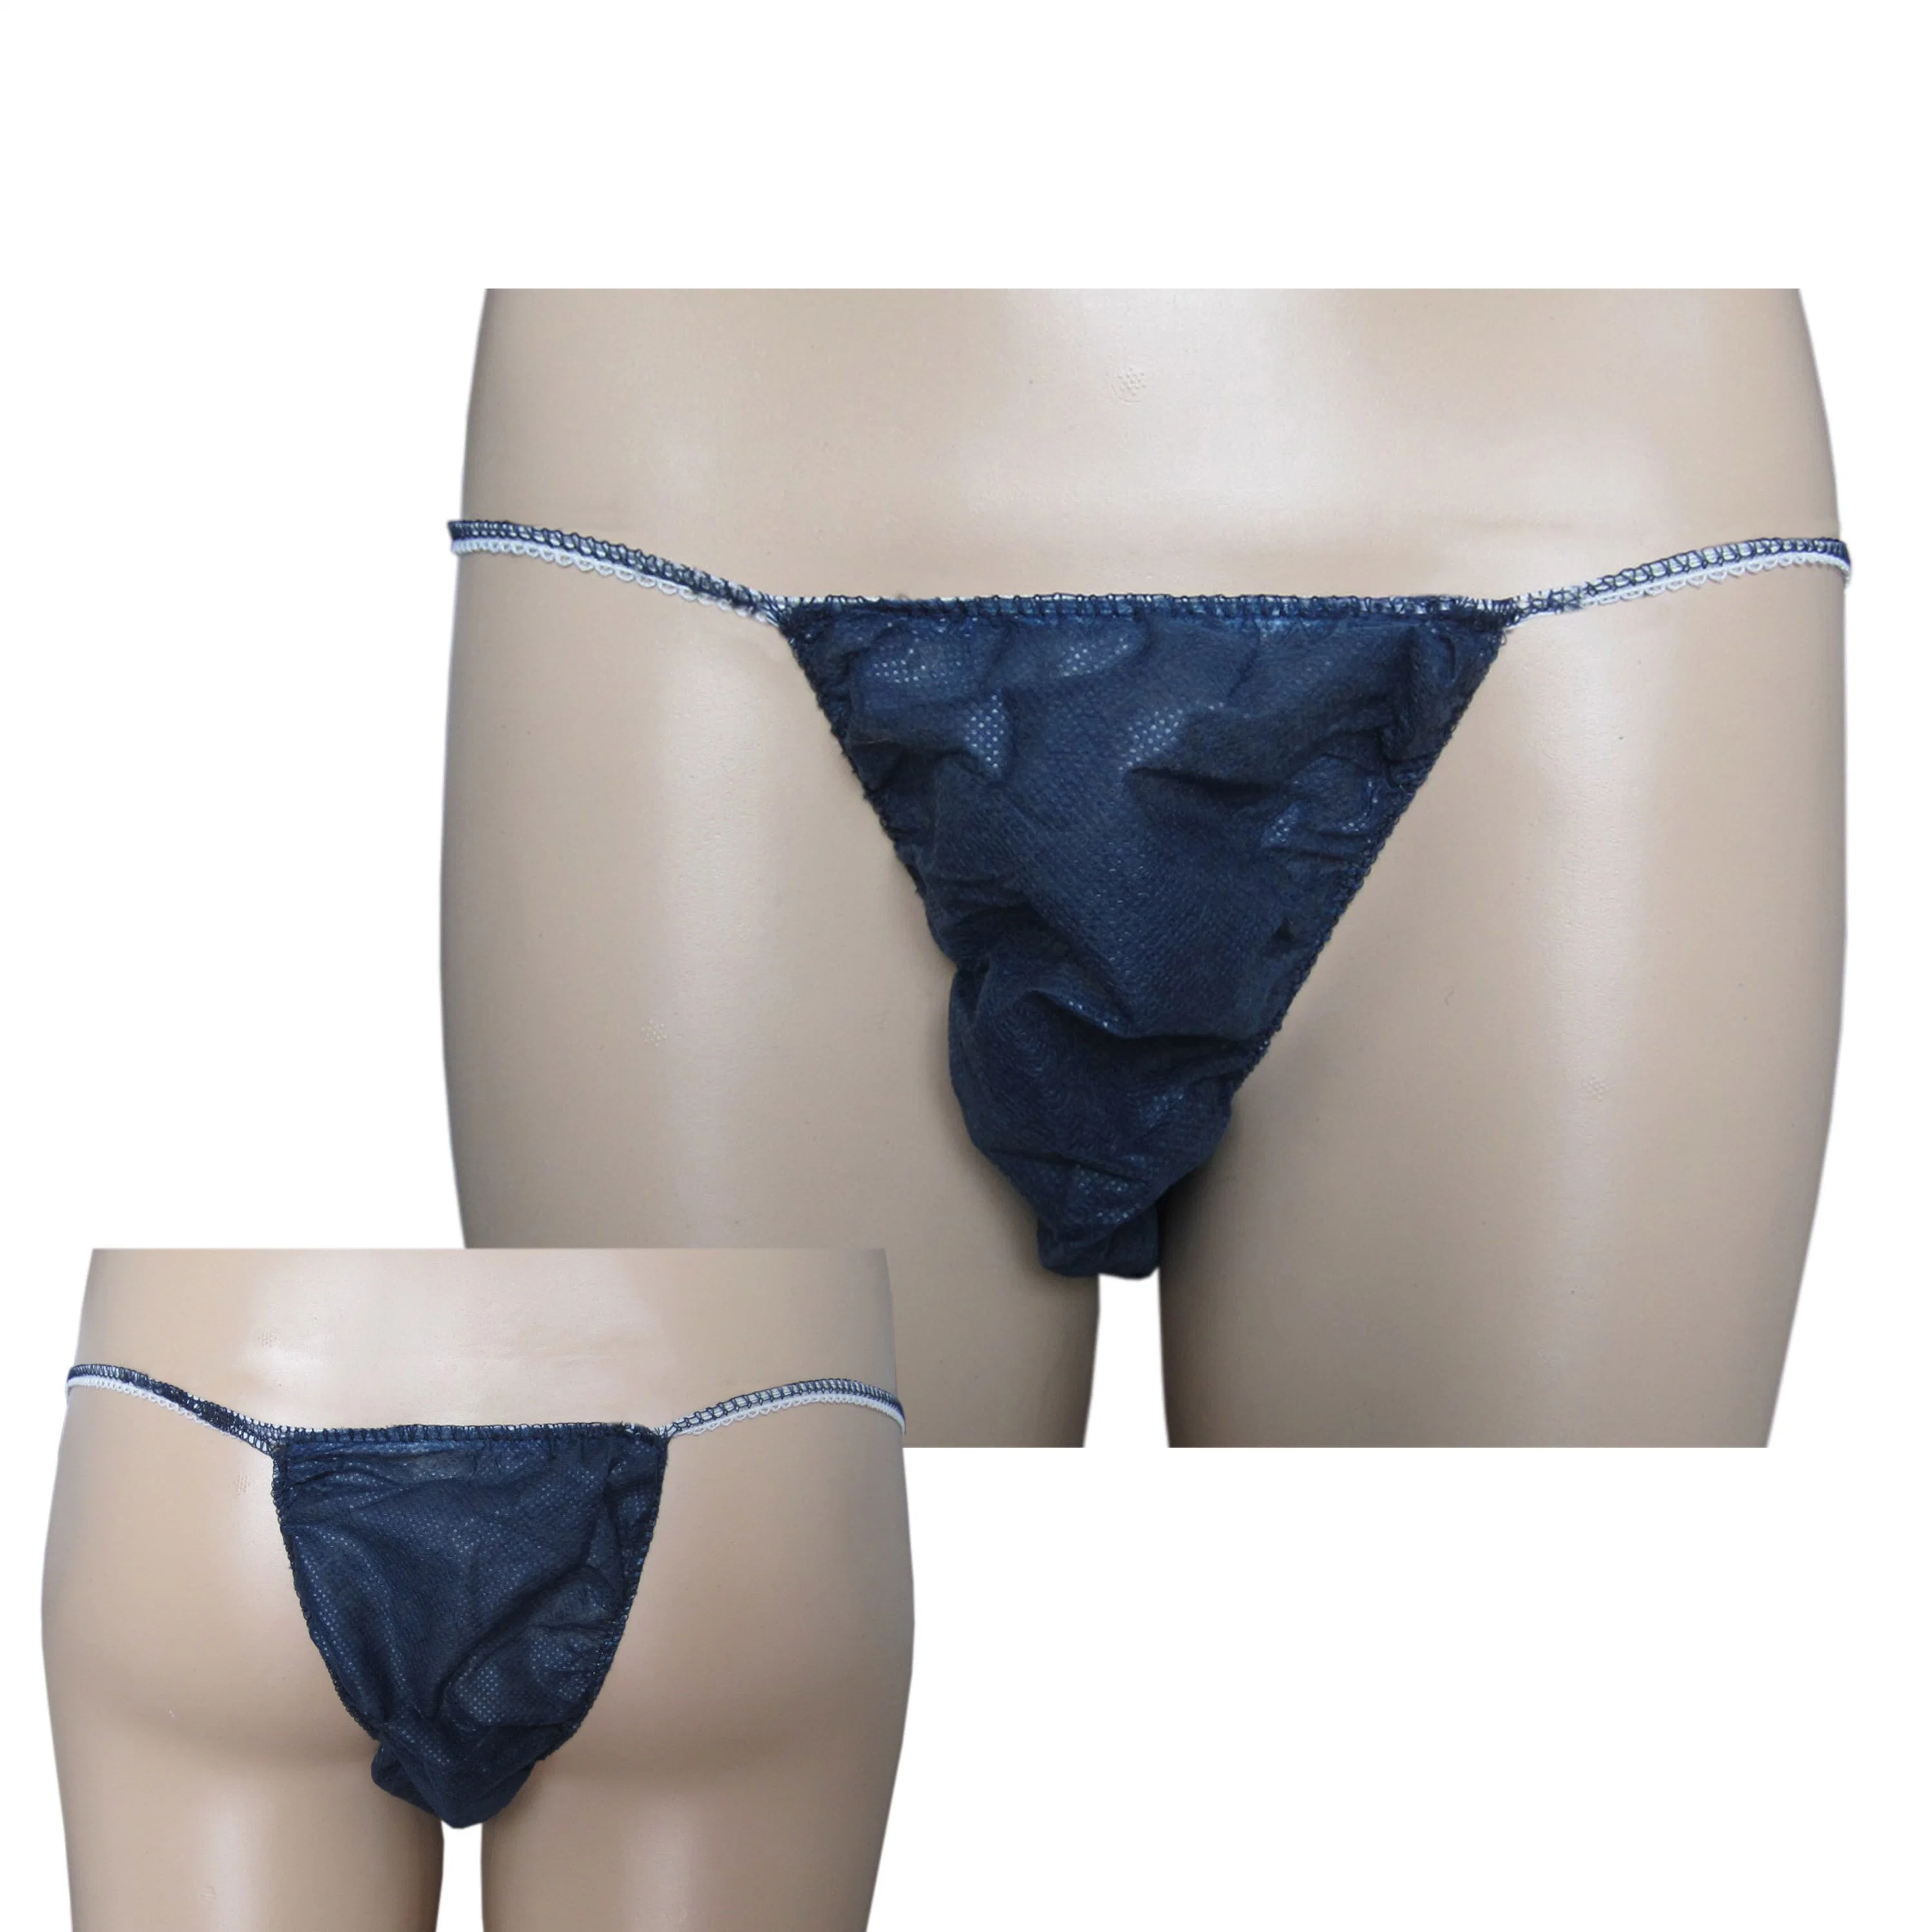 Hot Sale Disposable Thong Panties, Nonwoven Disposable Absorbent Panties for Salon Hospital